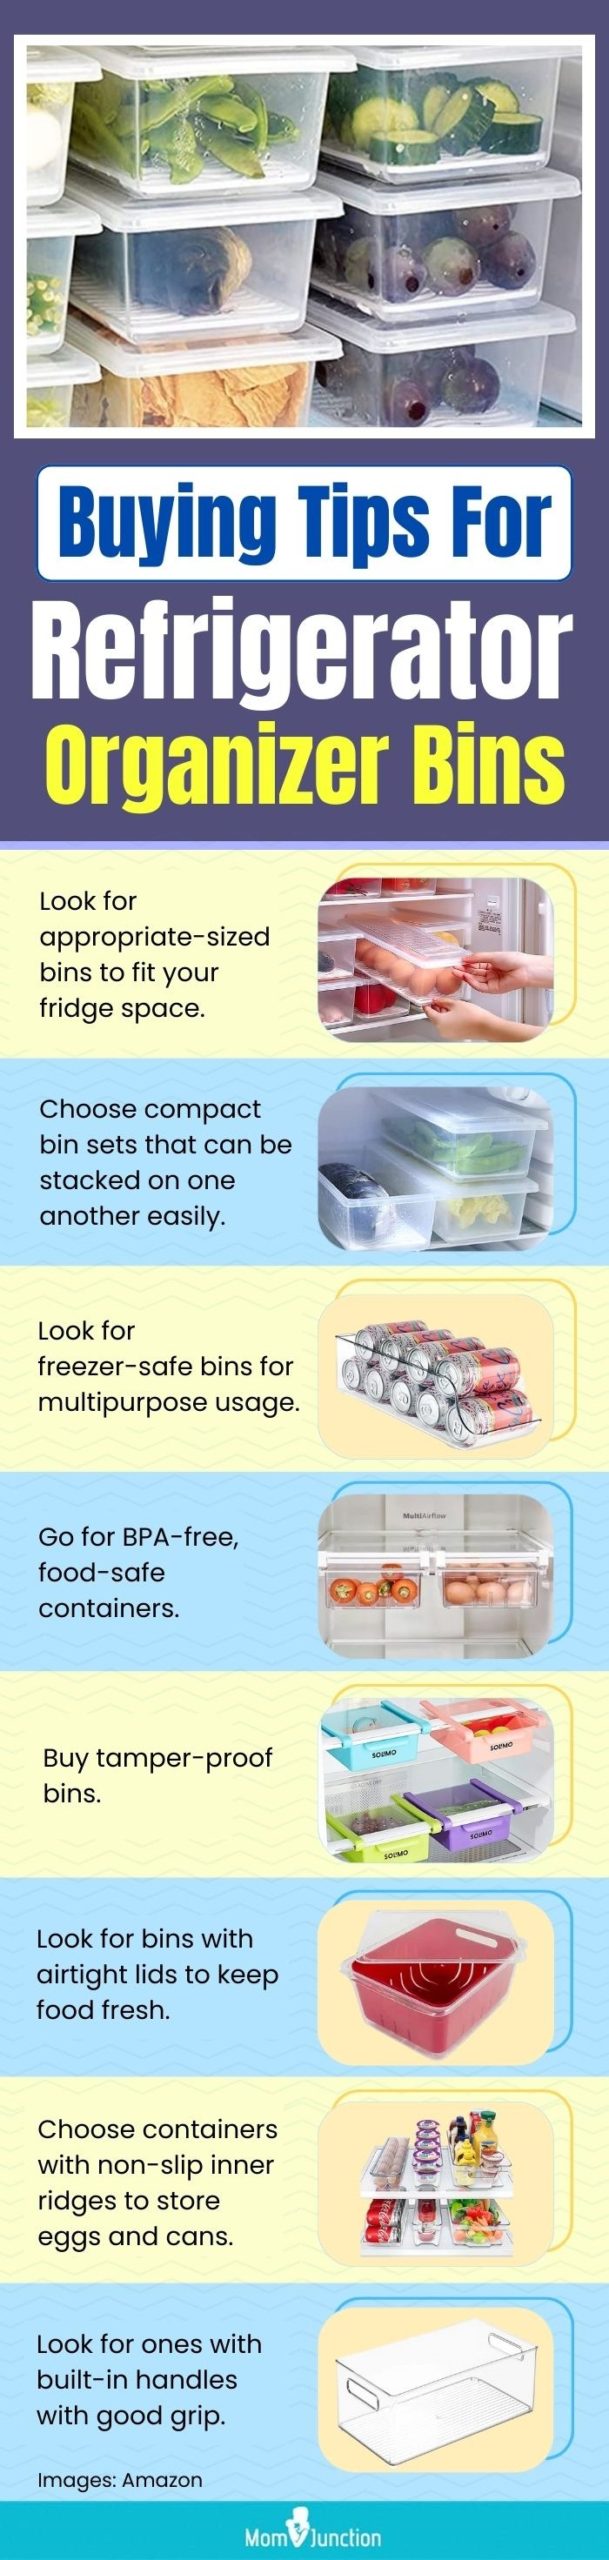 Buying Tips For Organizer Bins For Your Refrigerator(infographic)